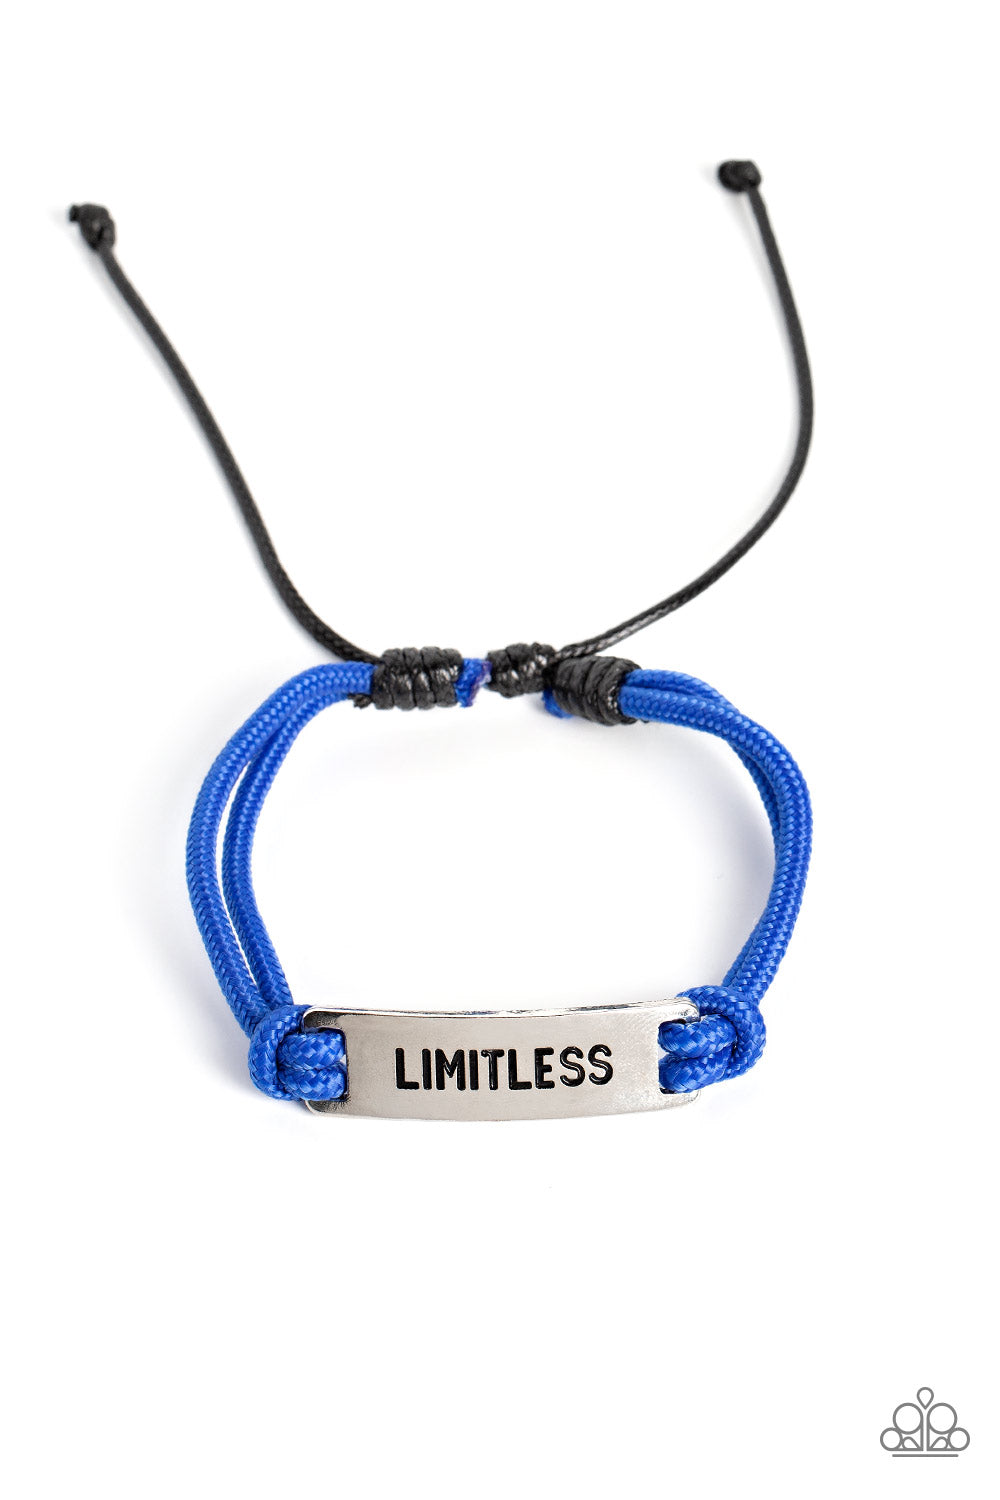 Limitless Layover Blue Urban Bracelet - Paparazzi Accessories  Double-stranded royal blue paracord rope encircles a square silver pendant. Featured on the pendant, the word "Limitless" is stamped in bold lettering for an urban statement piece around the wrist. Features an adjustable sliding knot closure.  Sold as one individual bracelet.